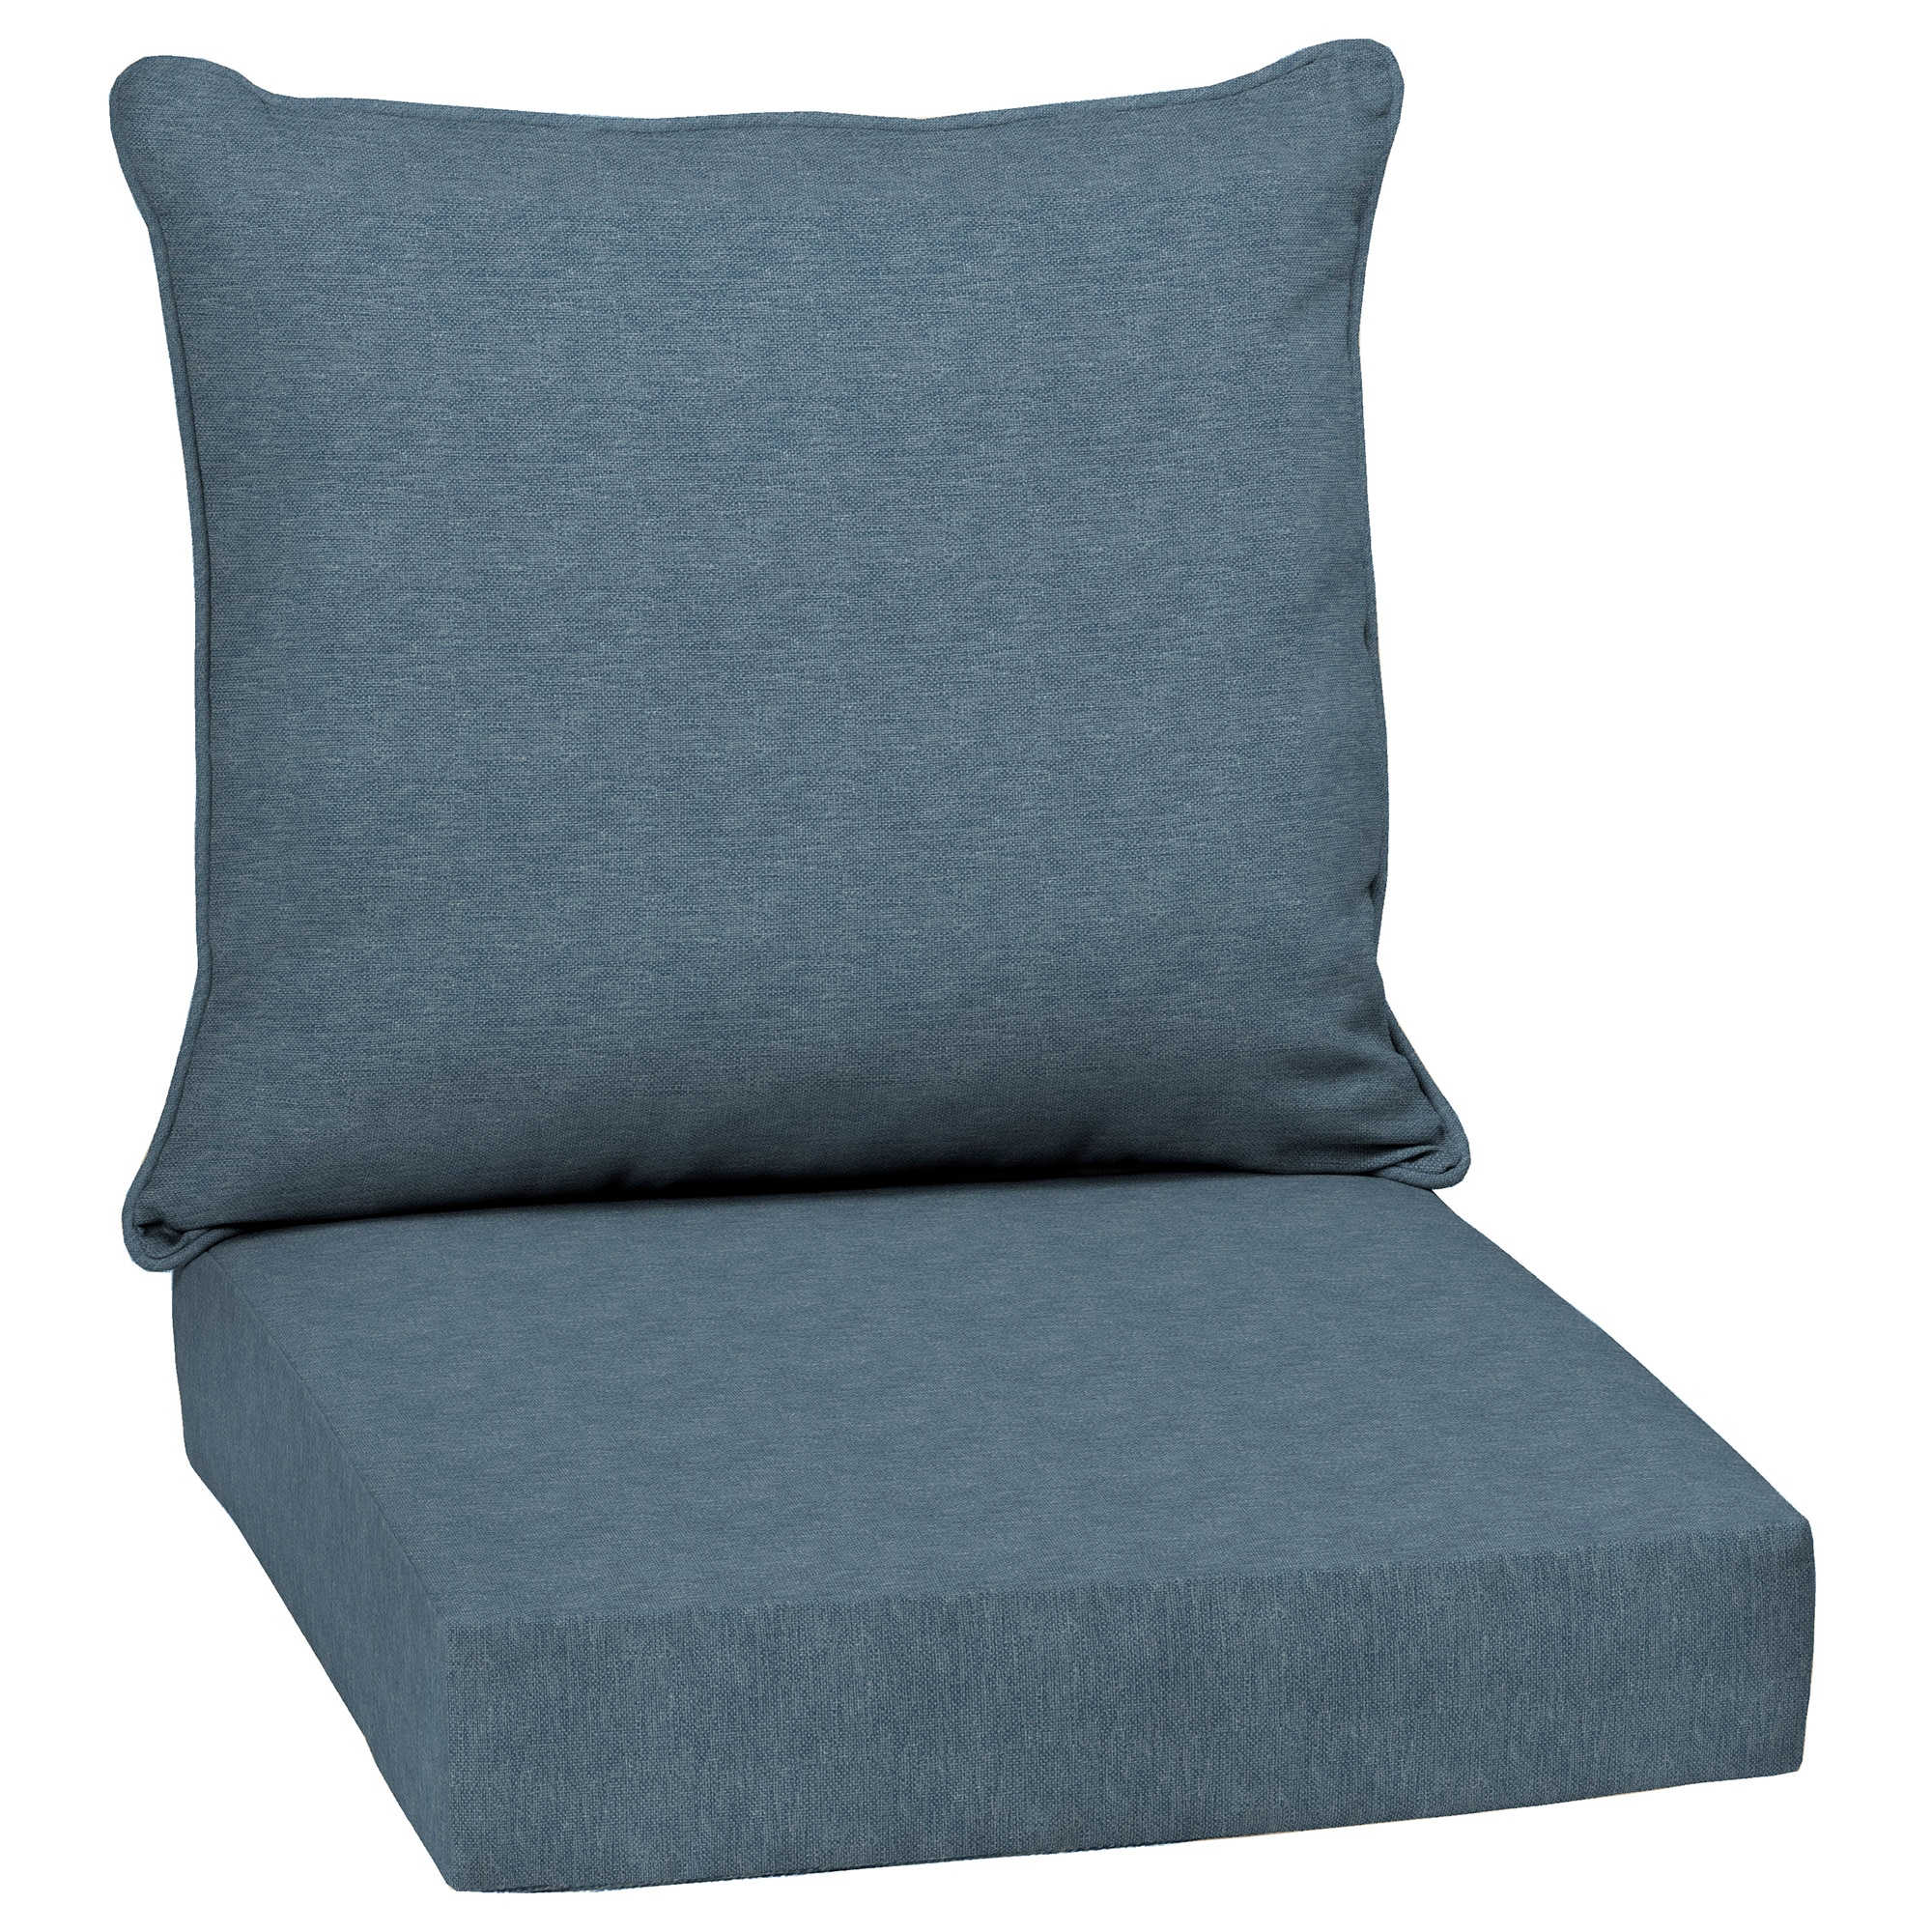 Replacement Seats and Cushions - FoamOnline